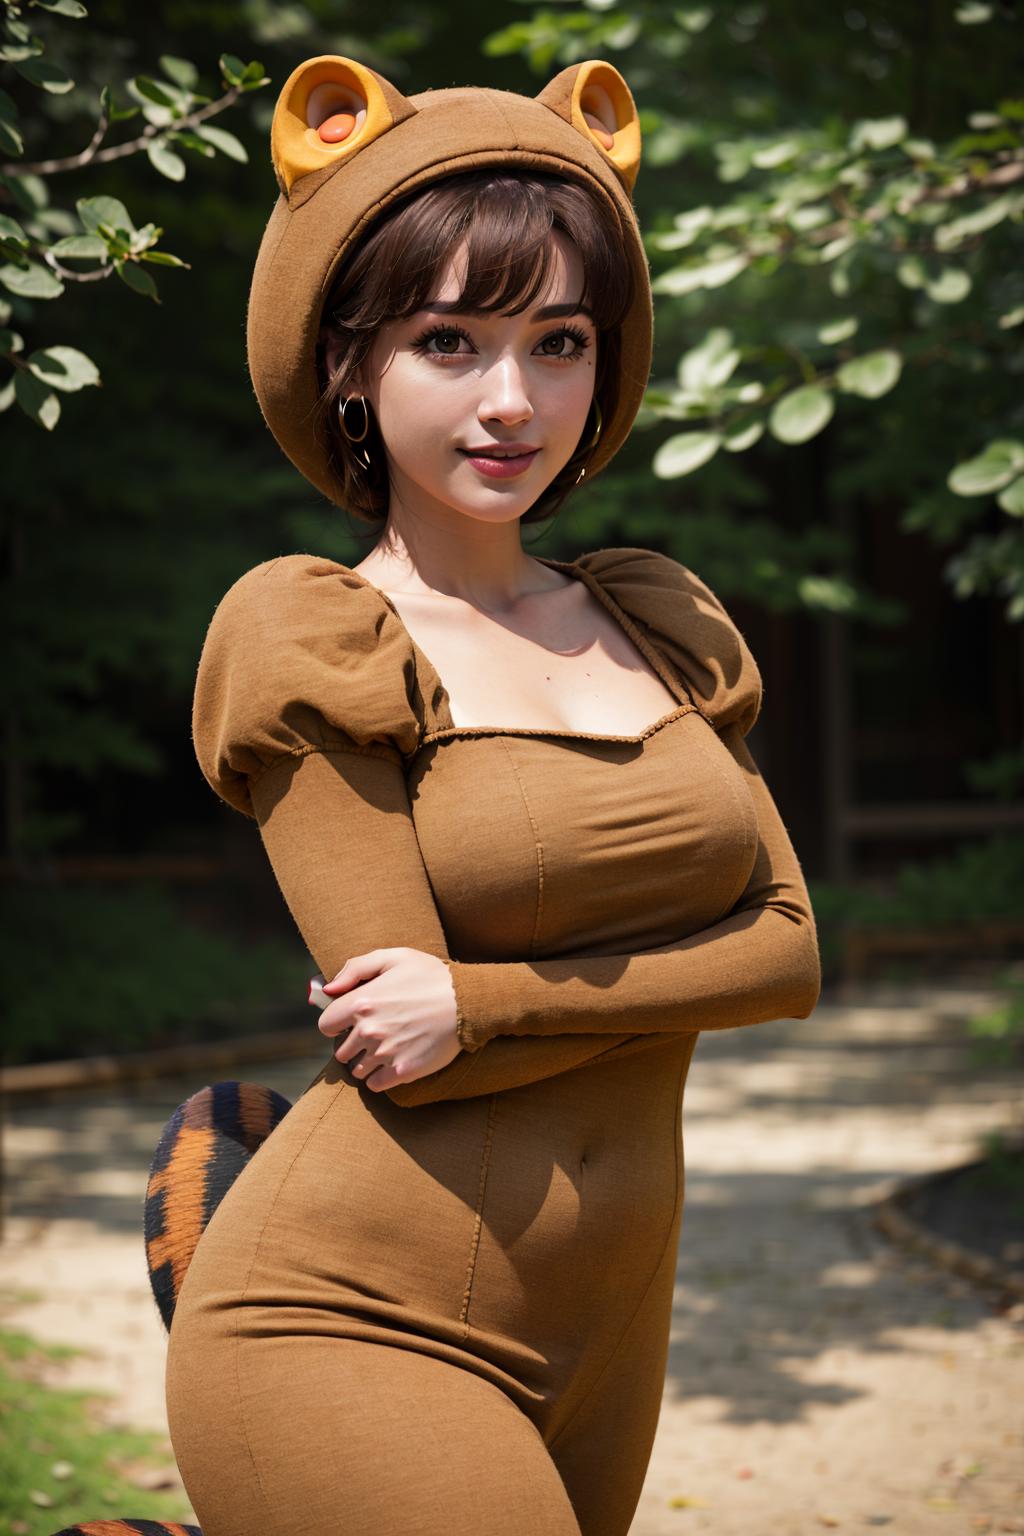 Tanooki Outfit | LoRA image by FallenIncursio